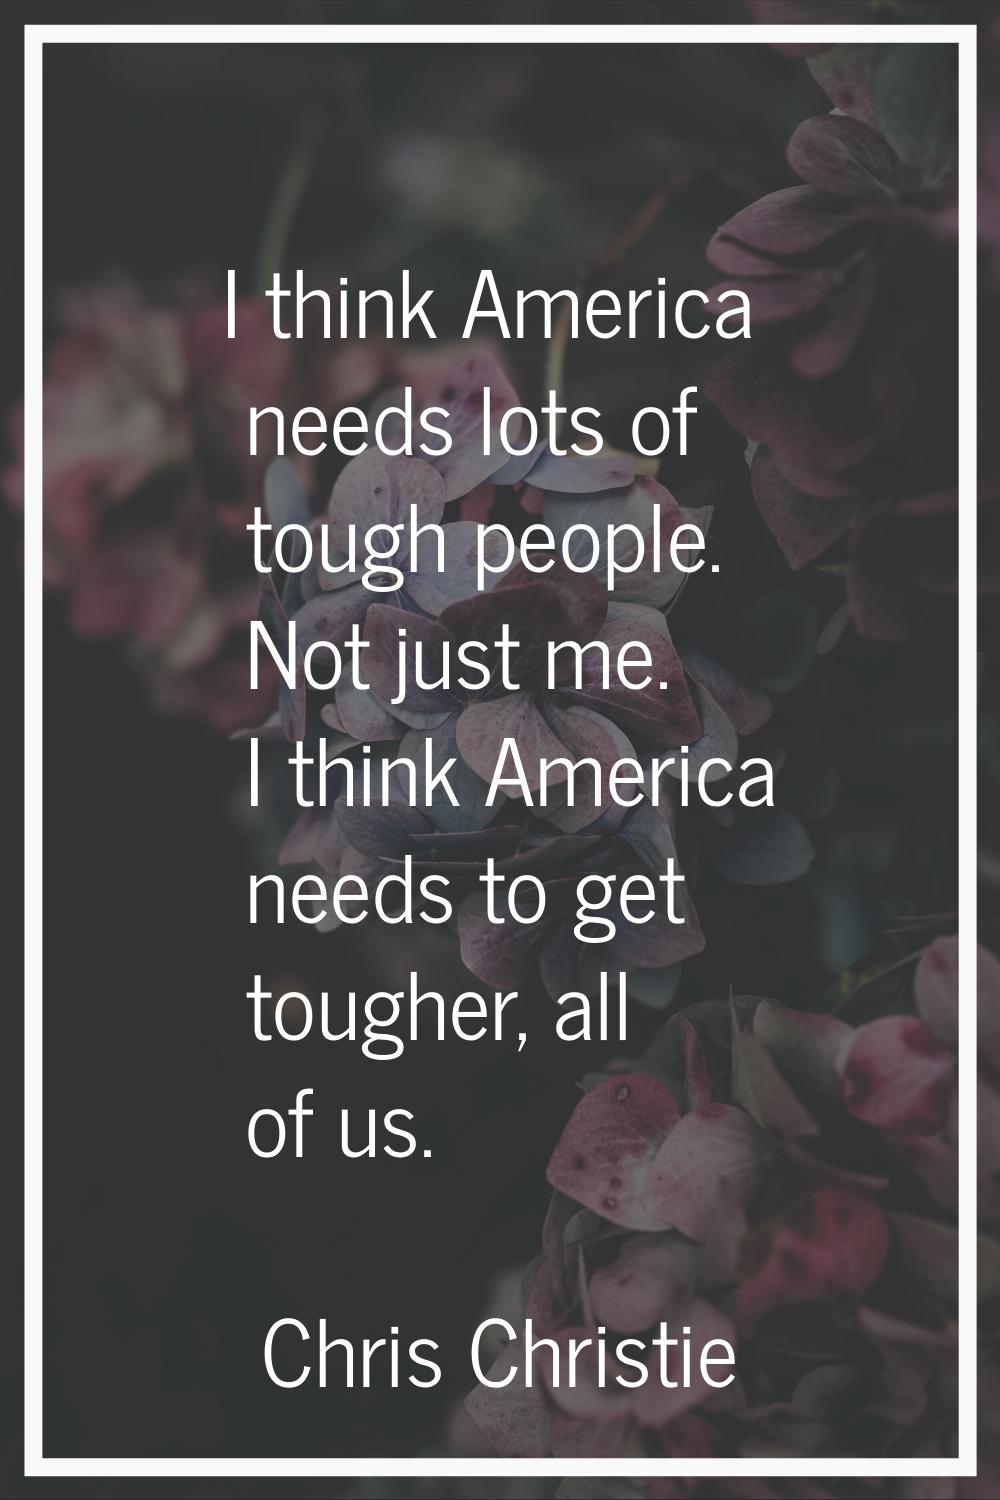 I think America needs lots of tough people. Not just me. I think America needs to get tougher, all 